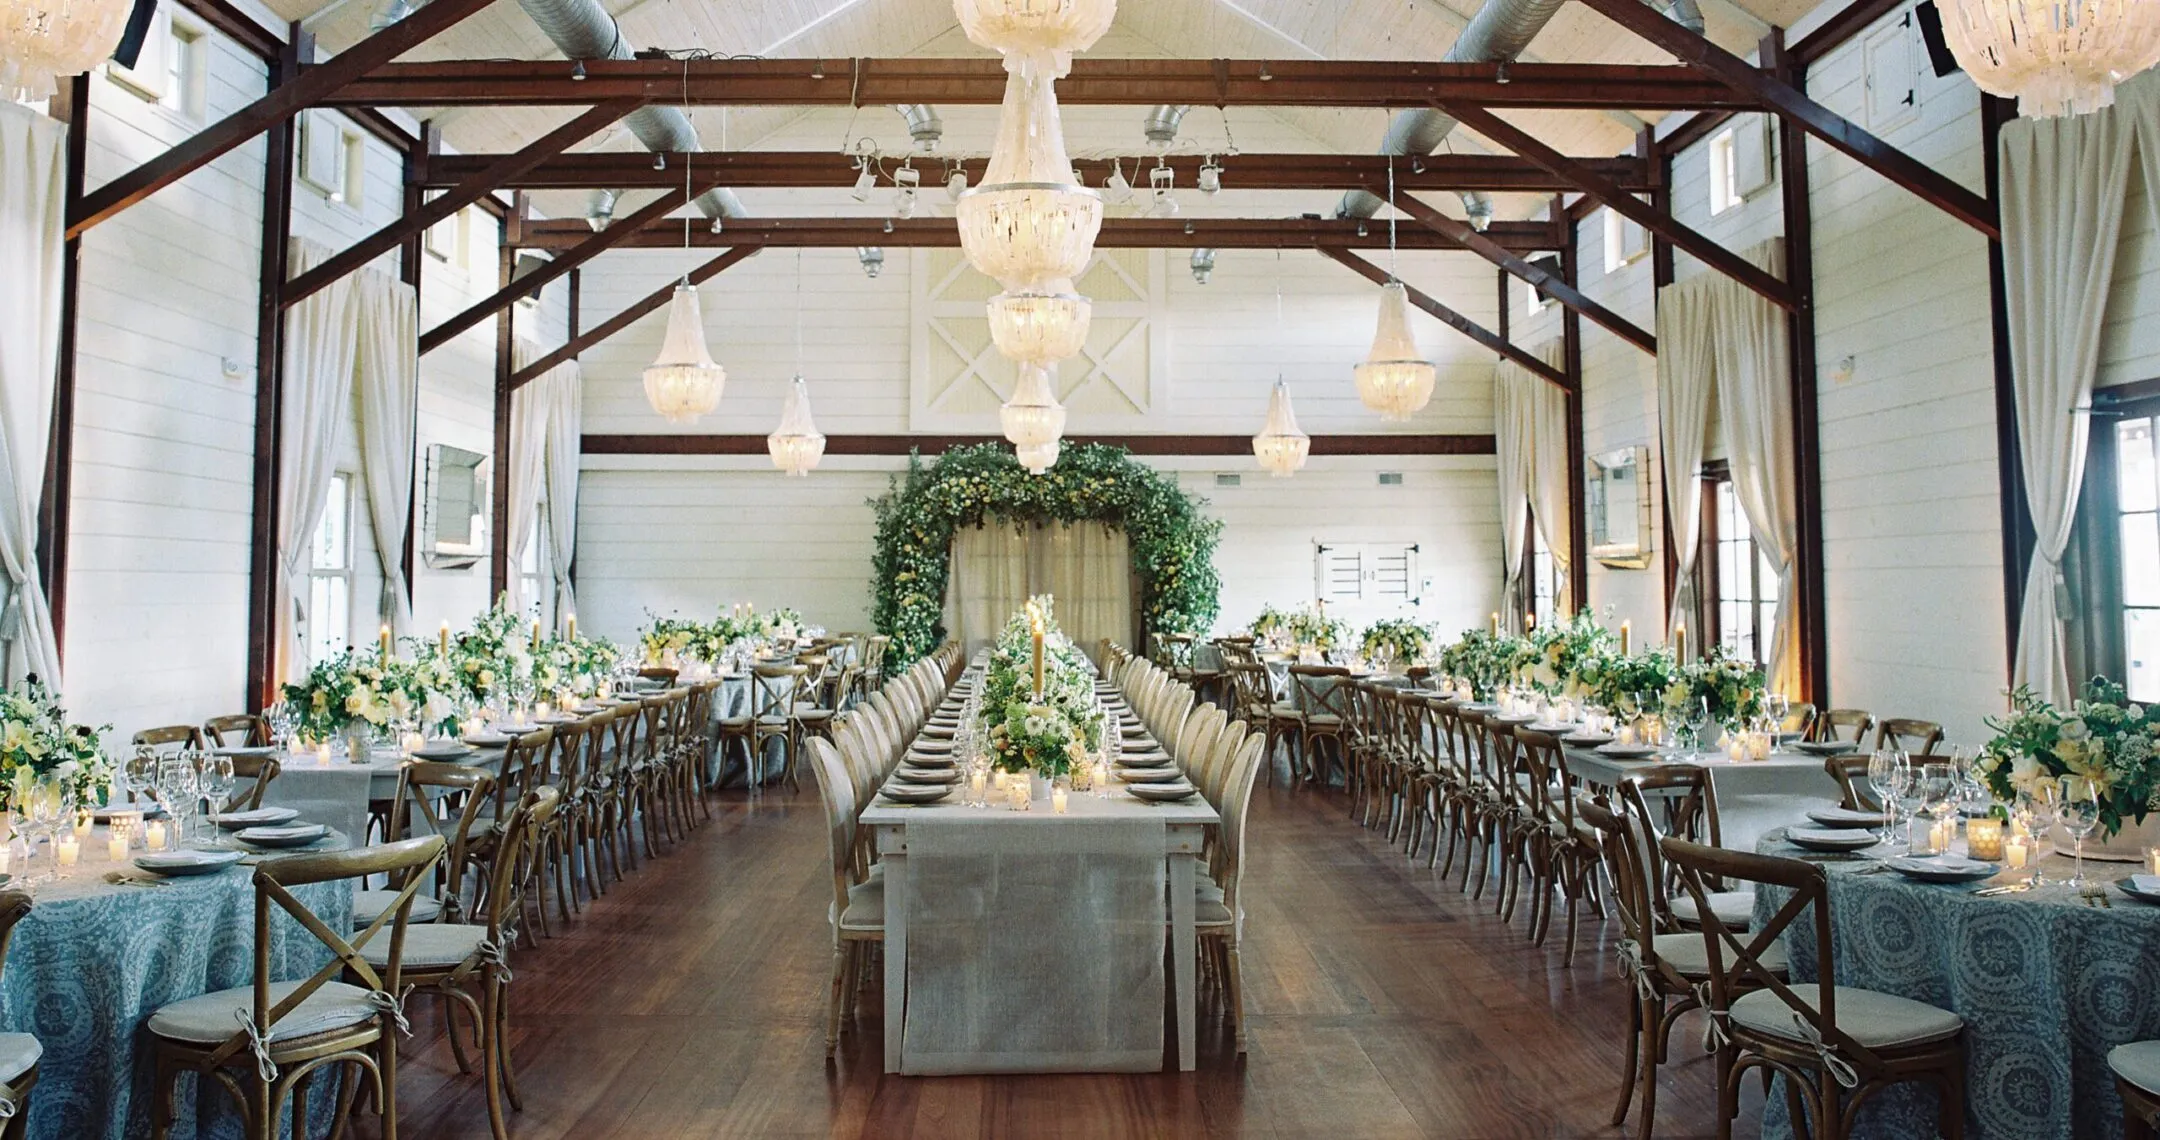 Reception in the large granary of the Pippin property.